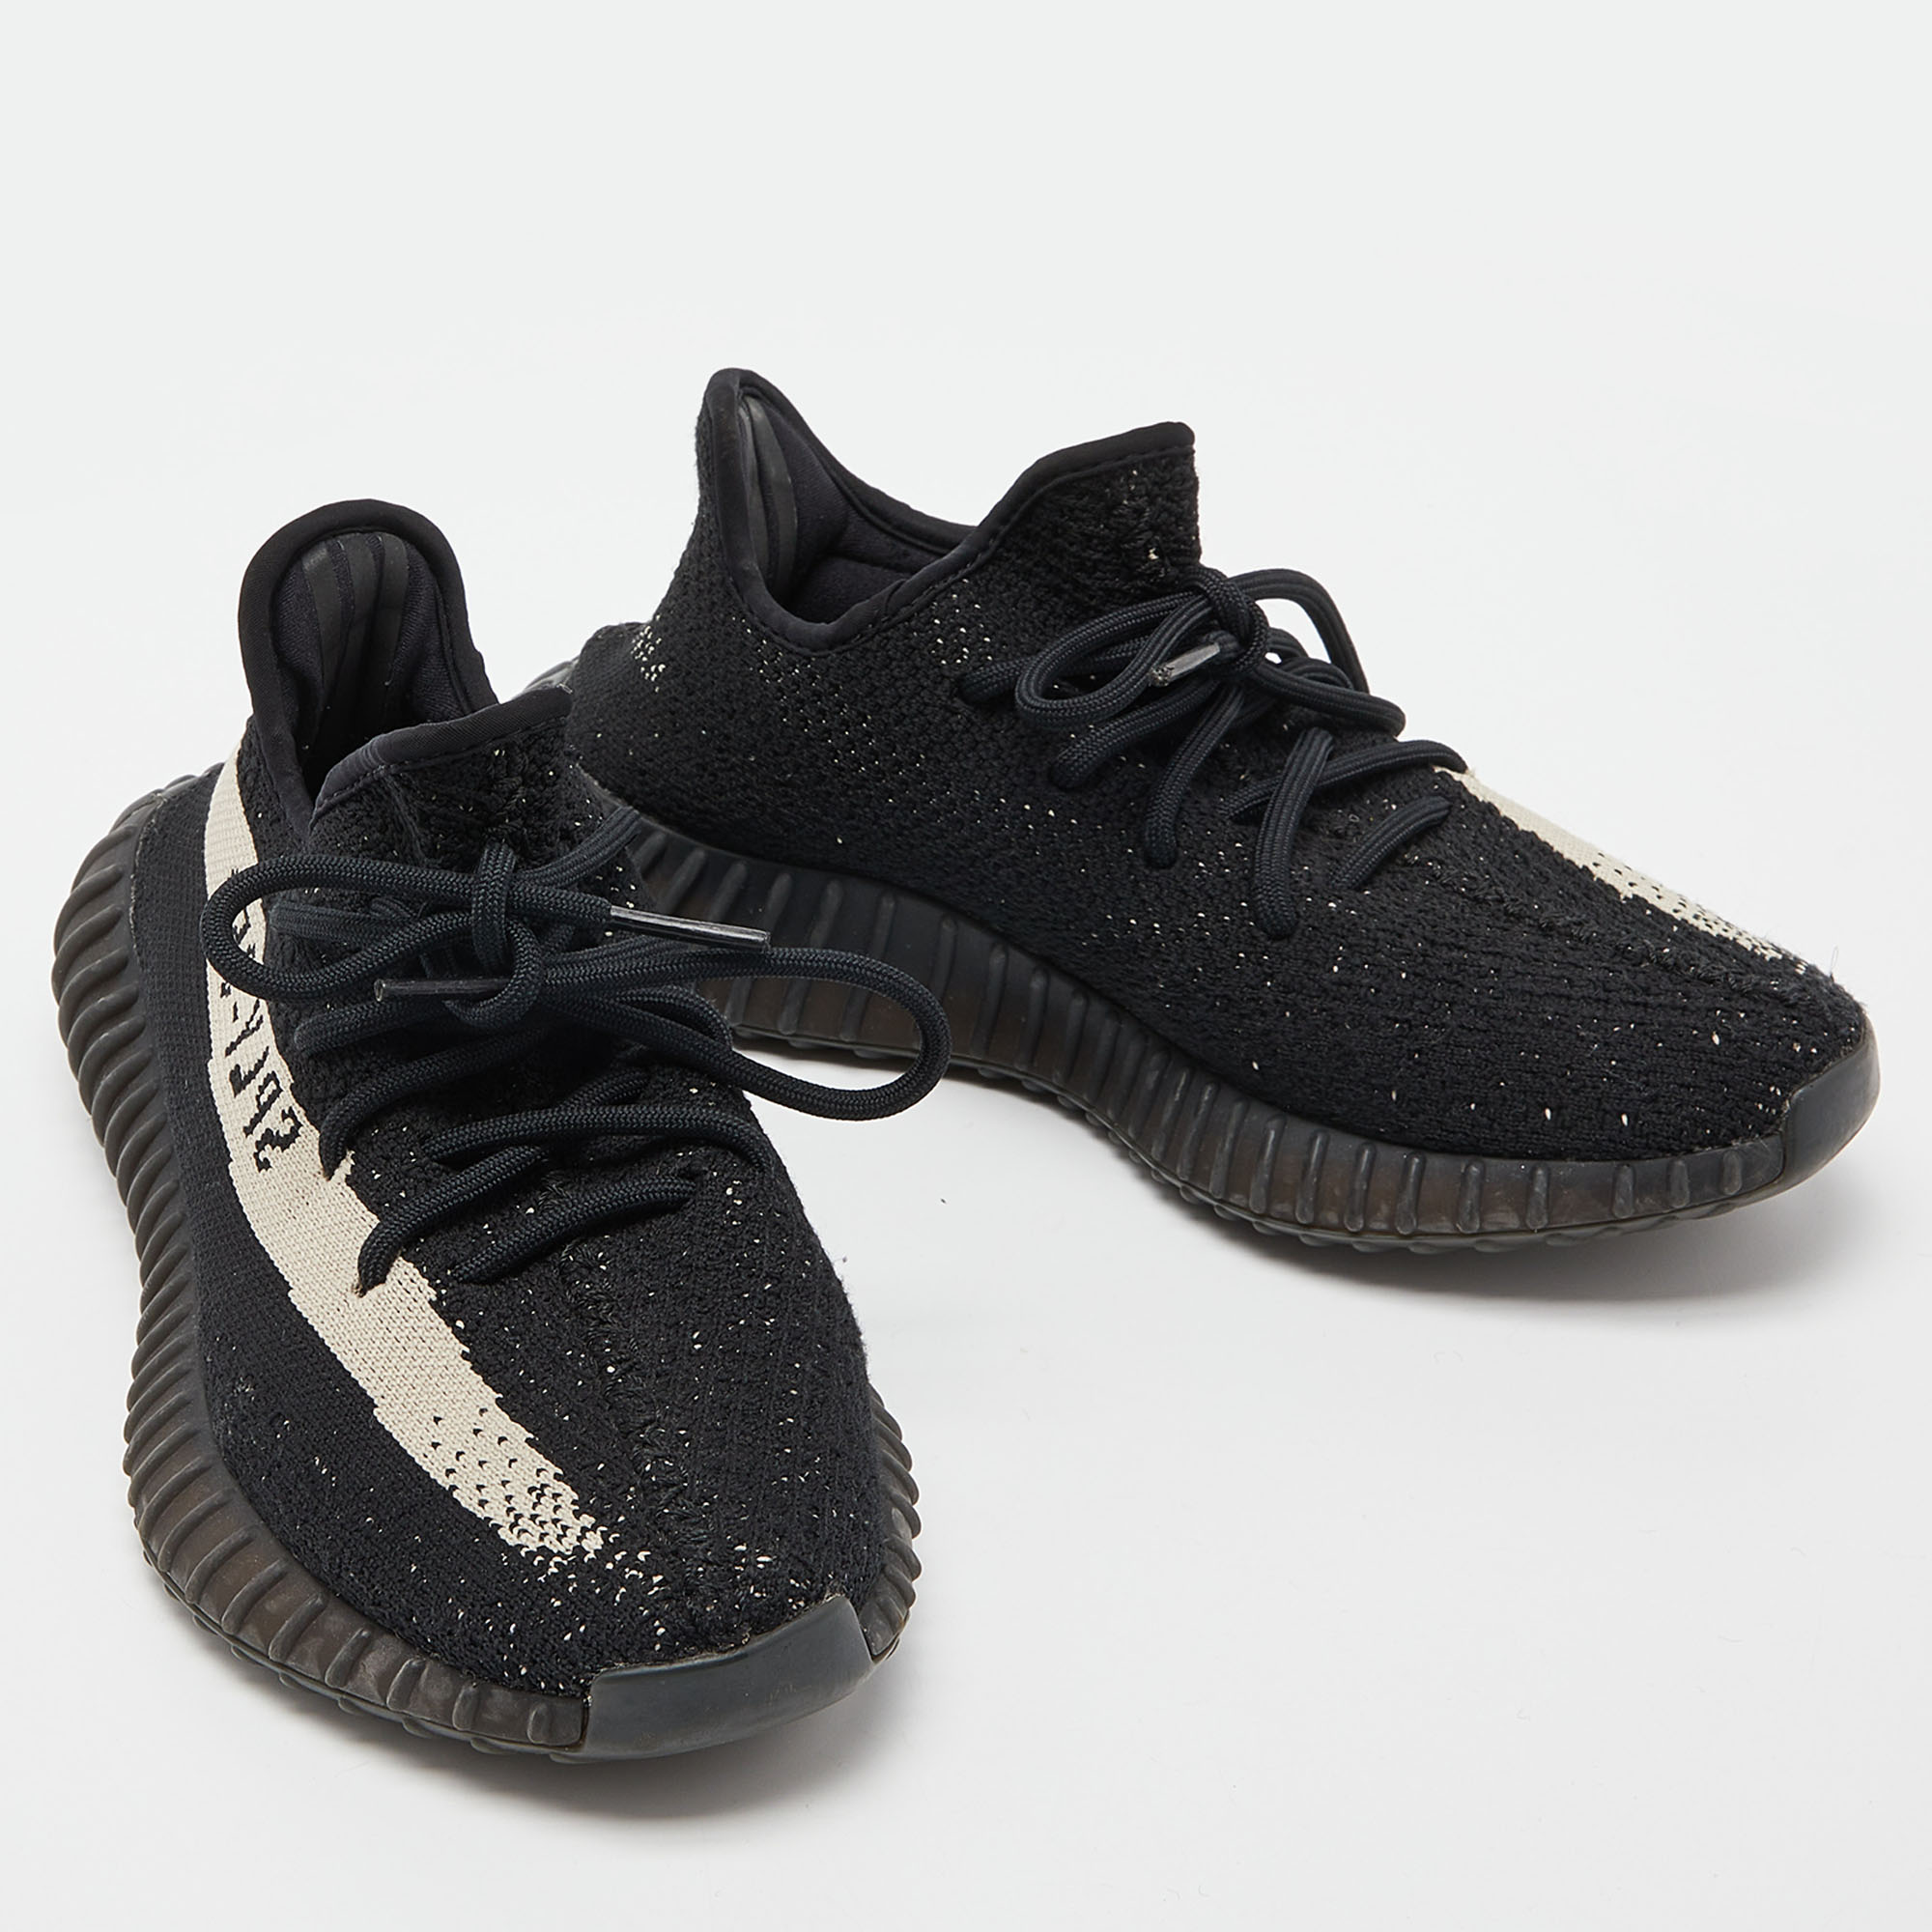 Yeezy X Adidas Black Boost Knit Fabric 350 V2 Core Black White Sneakers Size 39 1/3